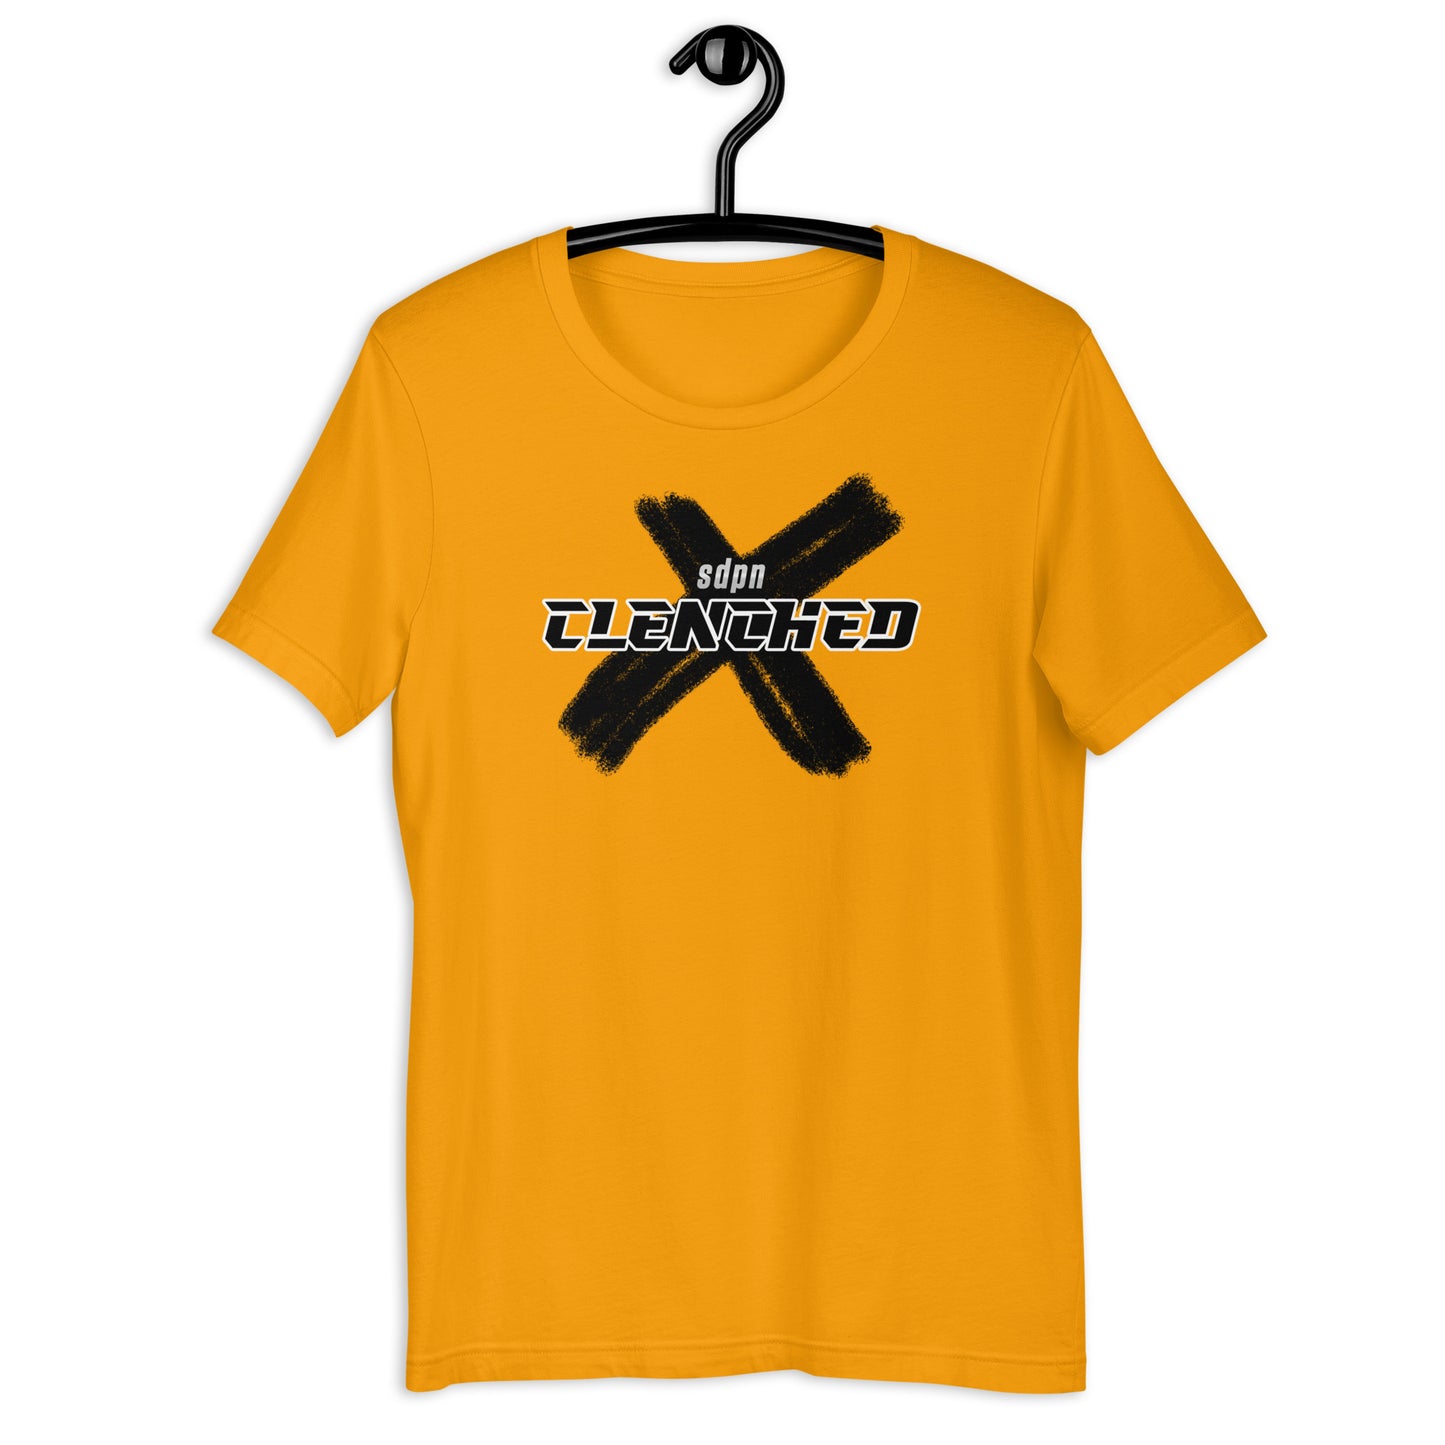 X - Clenched T-shirt